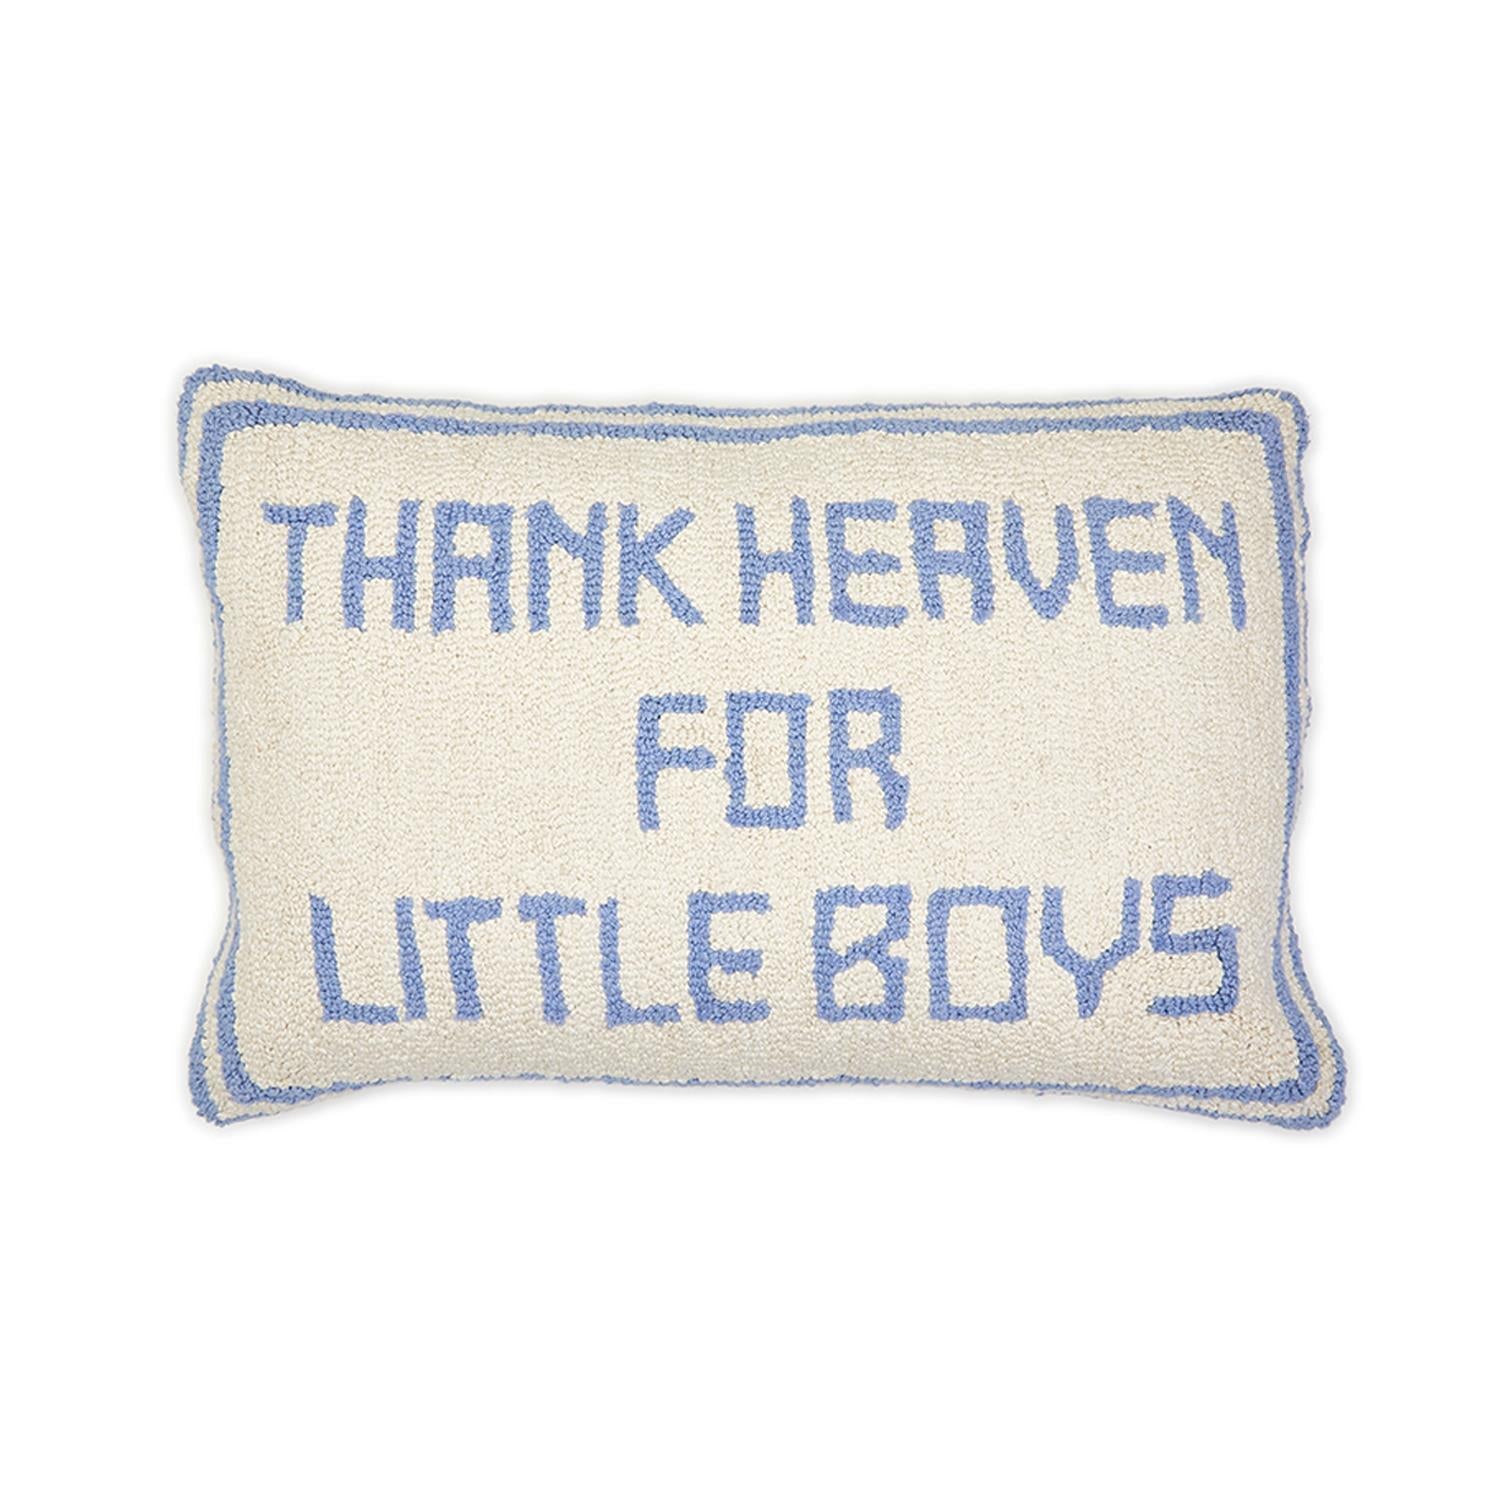 Thank Heaven For Little Boys - Embroidered Pillow - Mellow Monkey